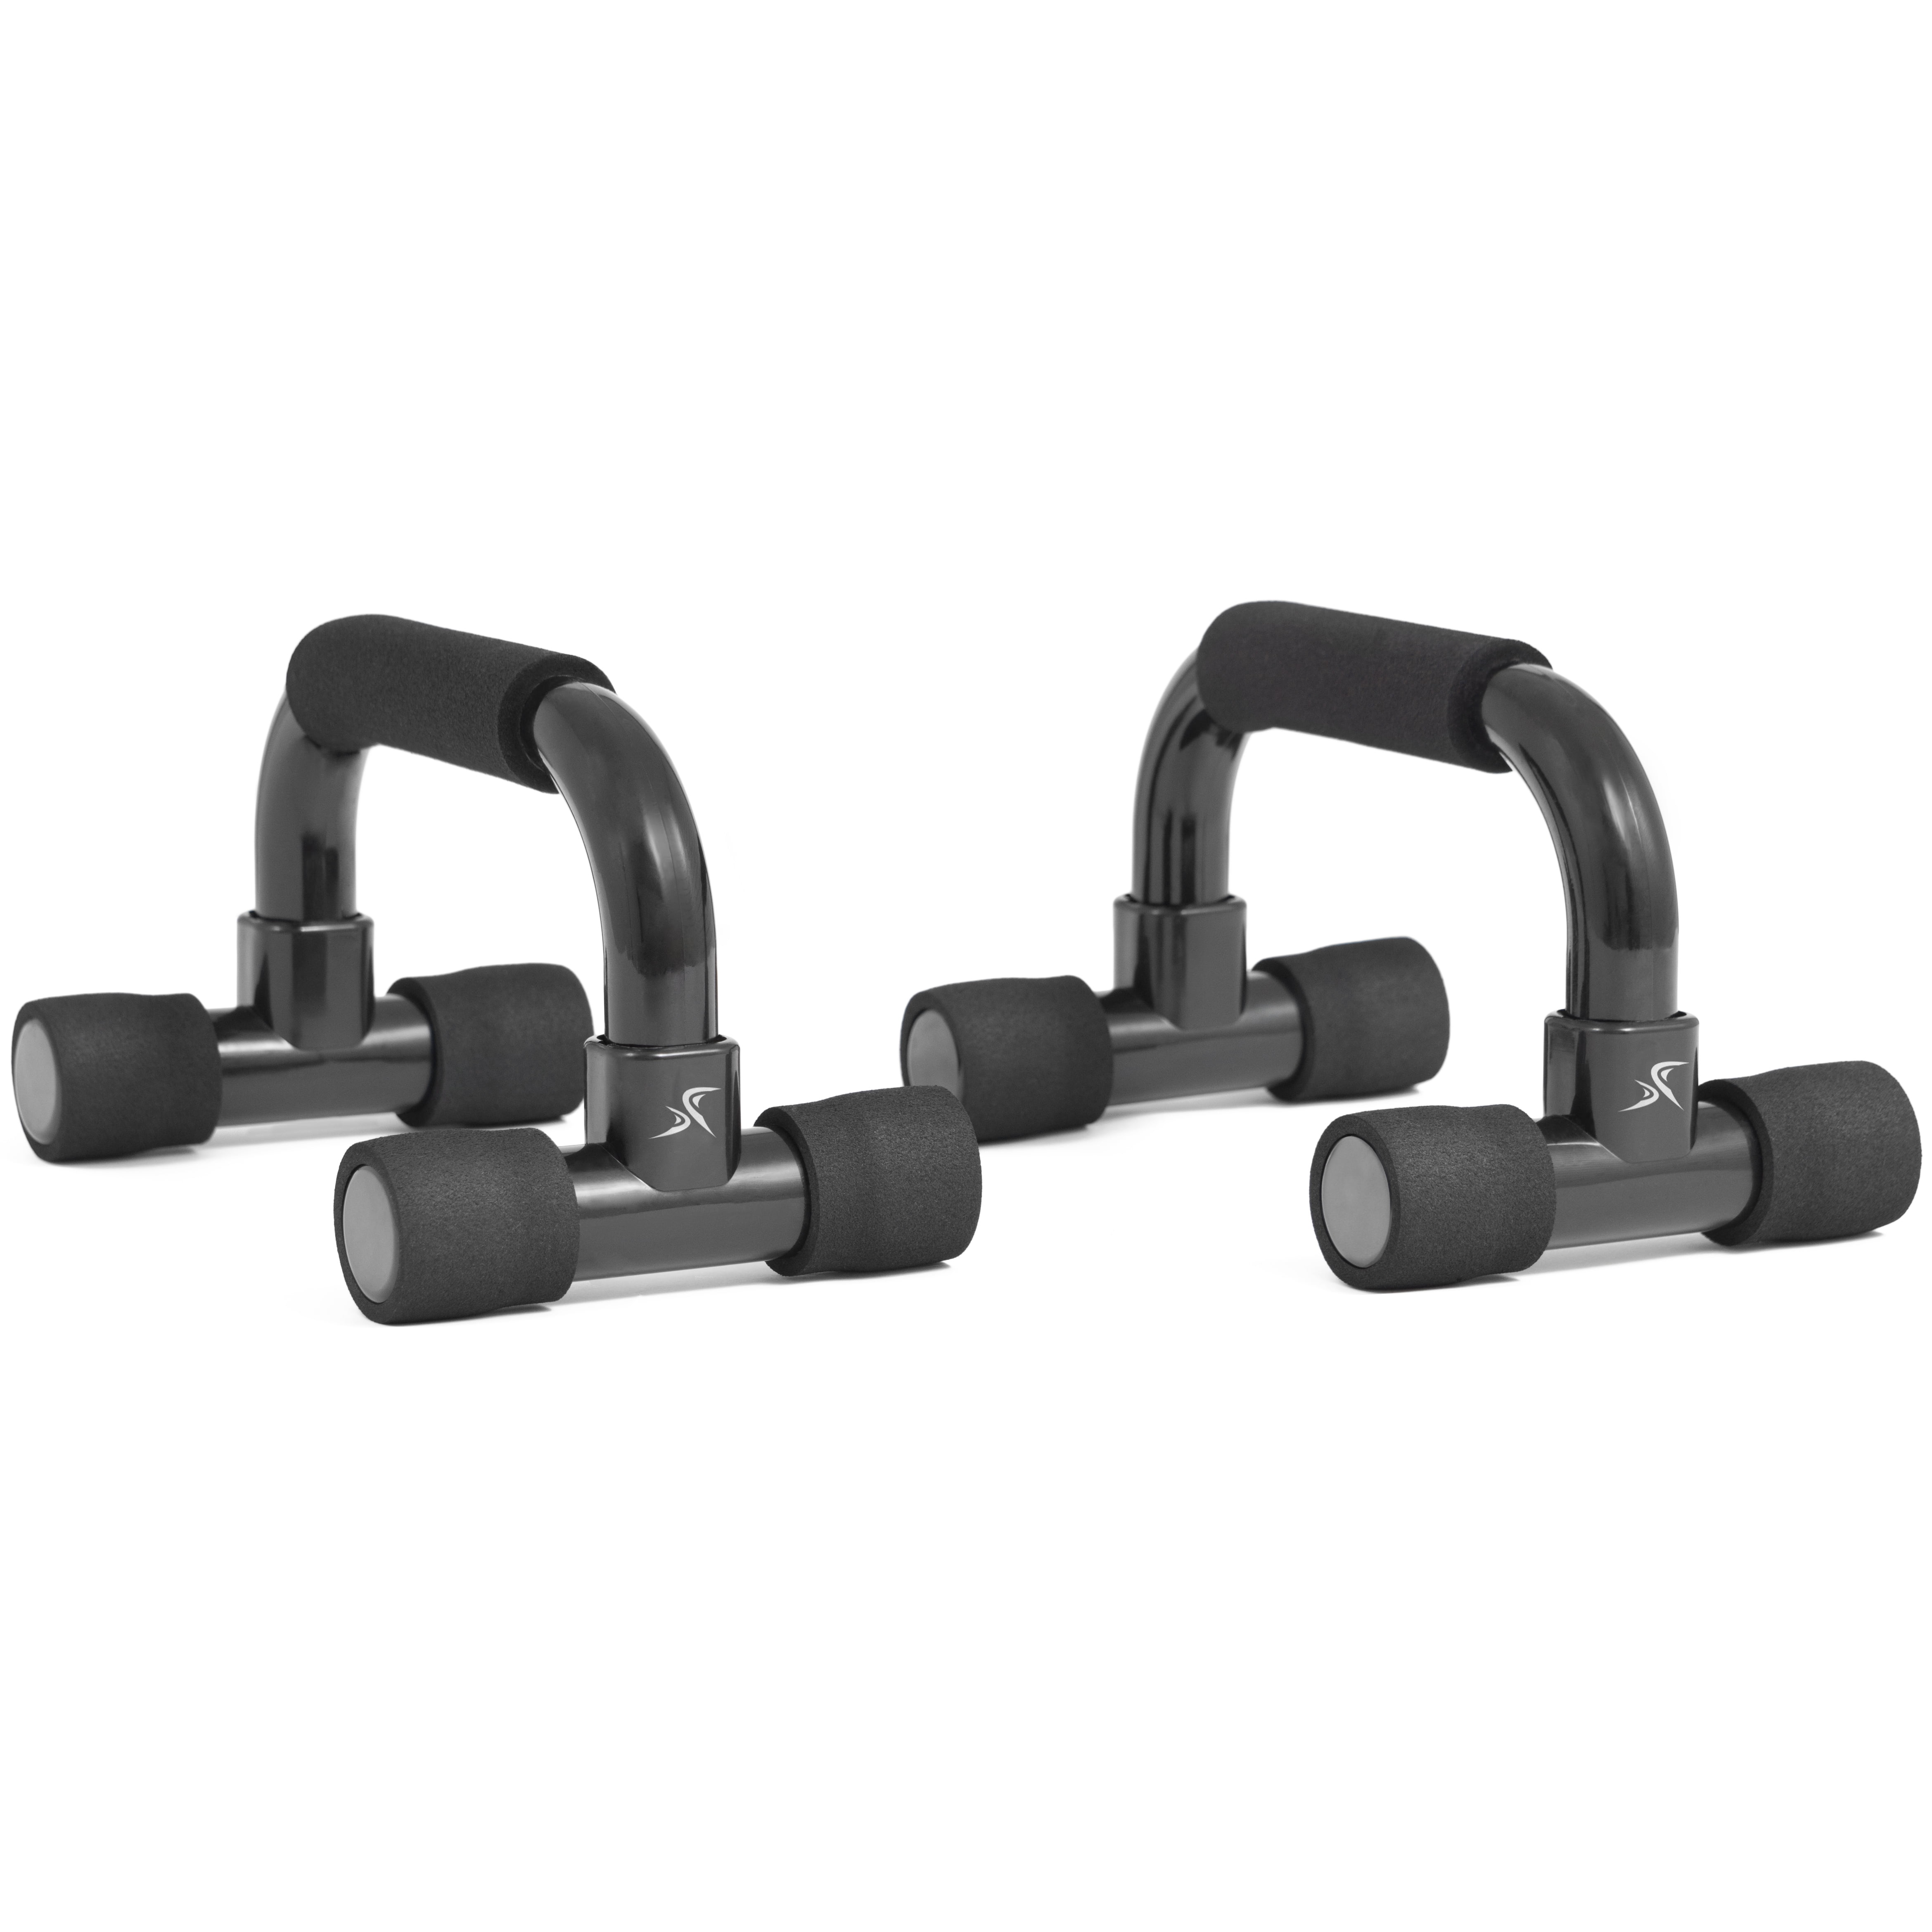 Black with Orange Detail Foam Handles. We R Fitness Press Up Foam Grip Push Up Bars Push Up Bar Set with Foam Handle Grips Achieve The Perfect Push Ups with these S-Shaped Home Gym